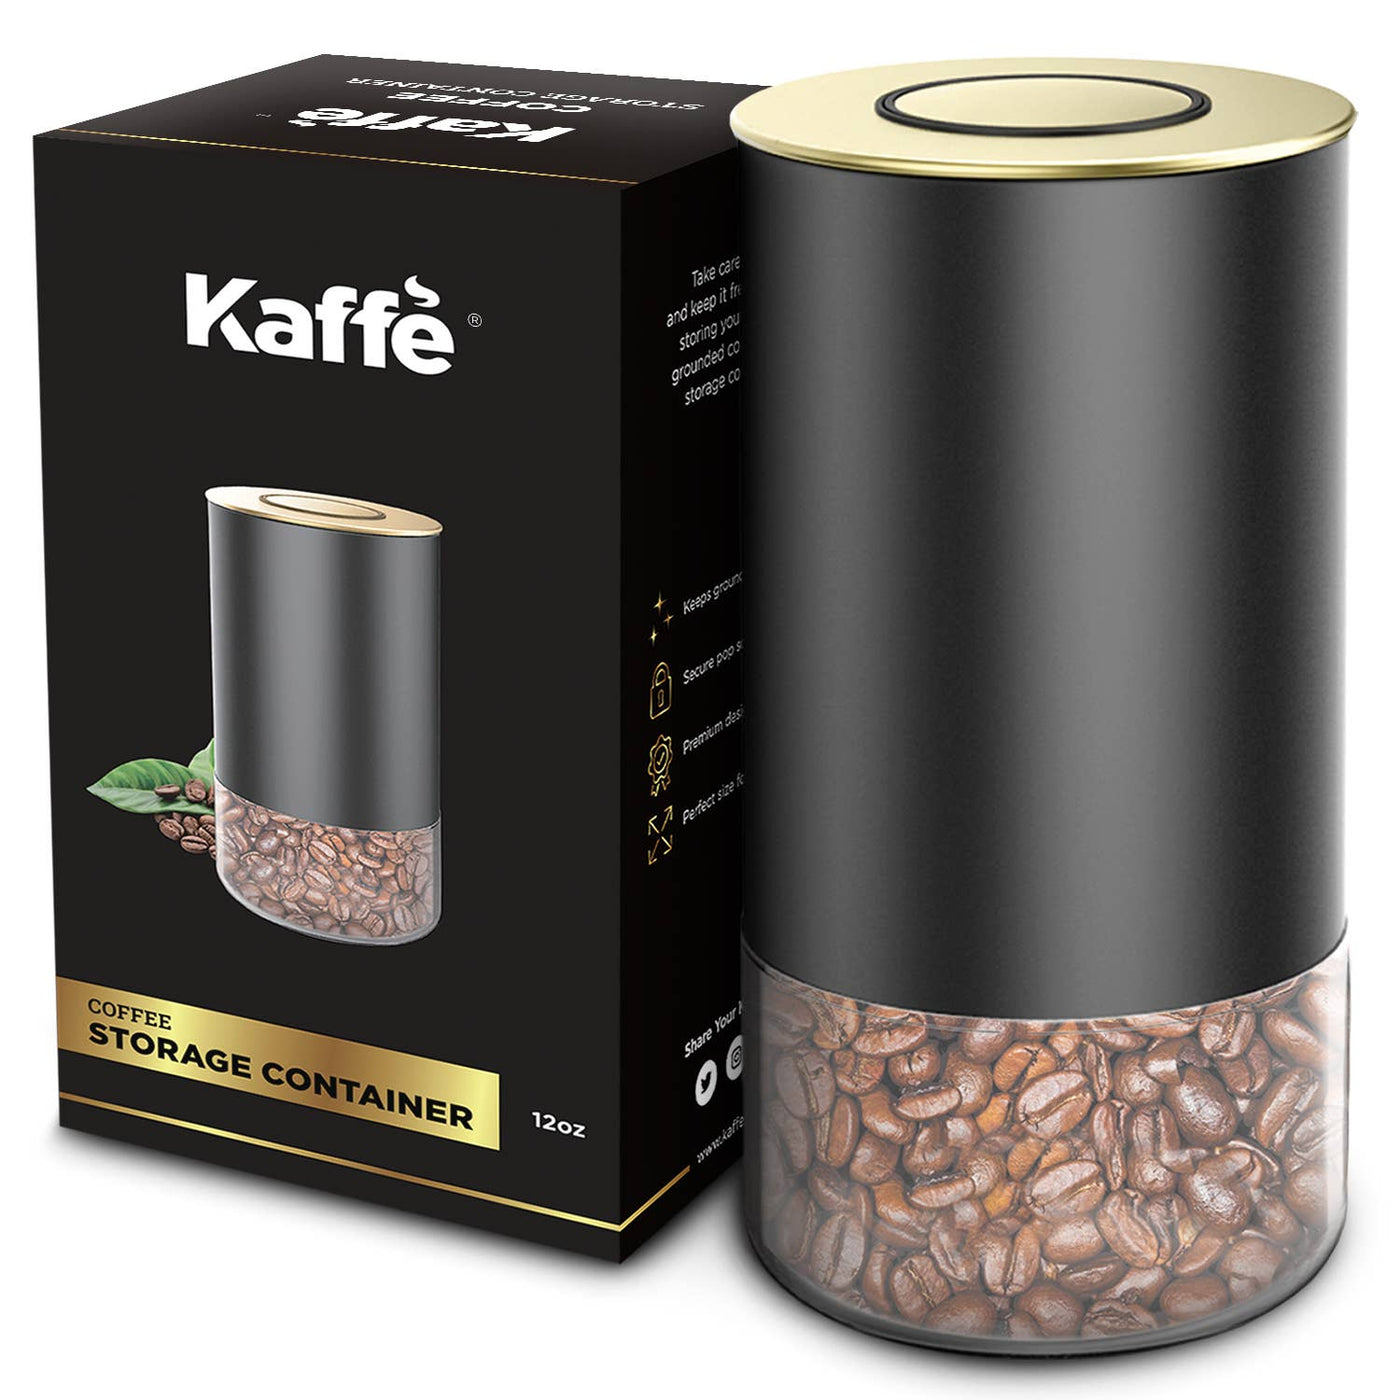 Kaffe Coffee Canister Storage Container Black/Gold Round 12oz